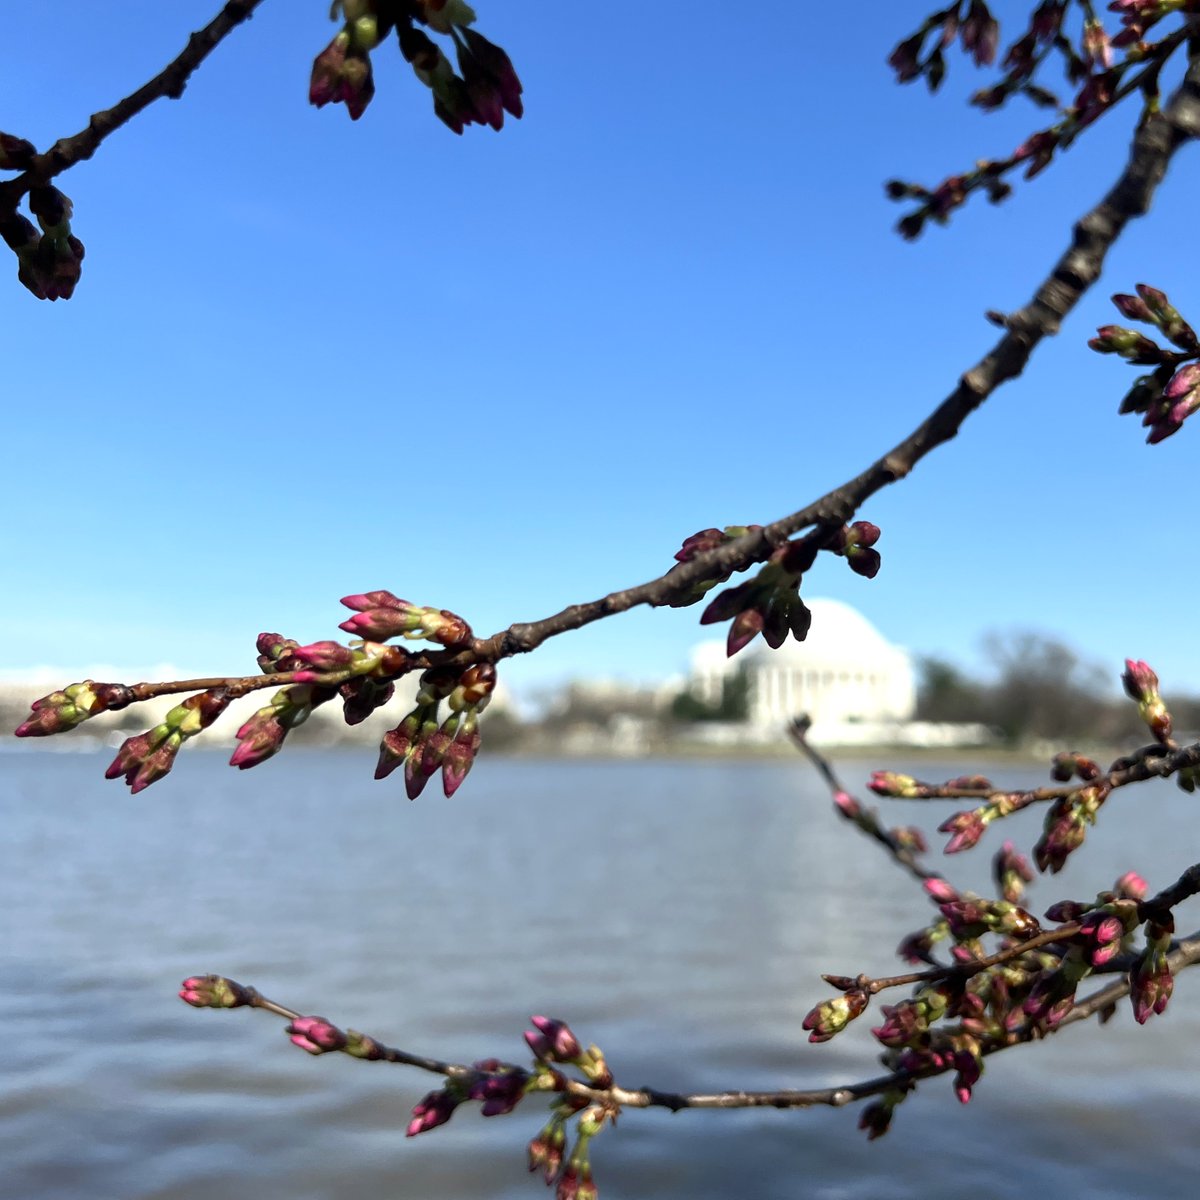 It's the #BloomWatch community's favorite announcement: we have Peduncle Elongation - the 4th of 6 stages on the path to peak bloom. 🌸🌸🌸🌸/🌸🌸 Follow online at nps.gov/cherry #cherryblossom #WashingtonDC